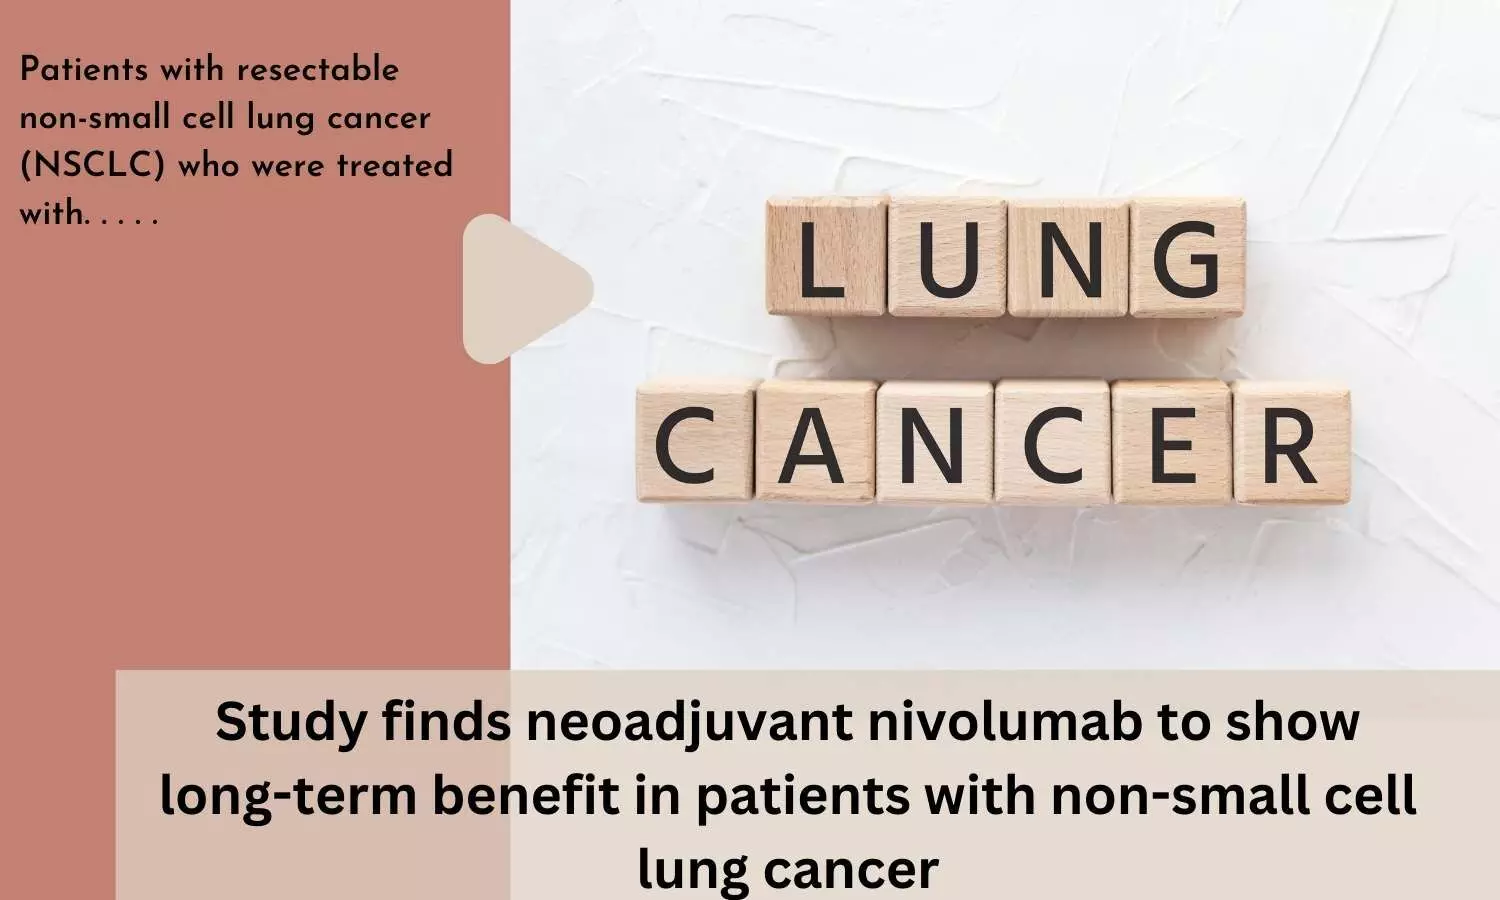 Study finds neoadjuvant nivolumab to show long-term benefit in patients with non-small cell lung cancer